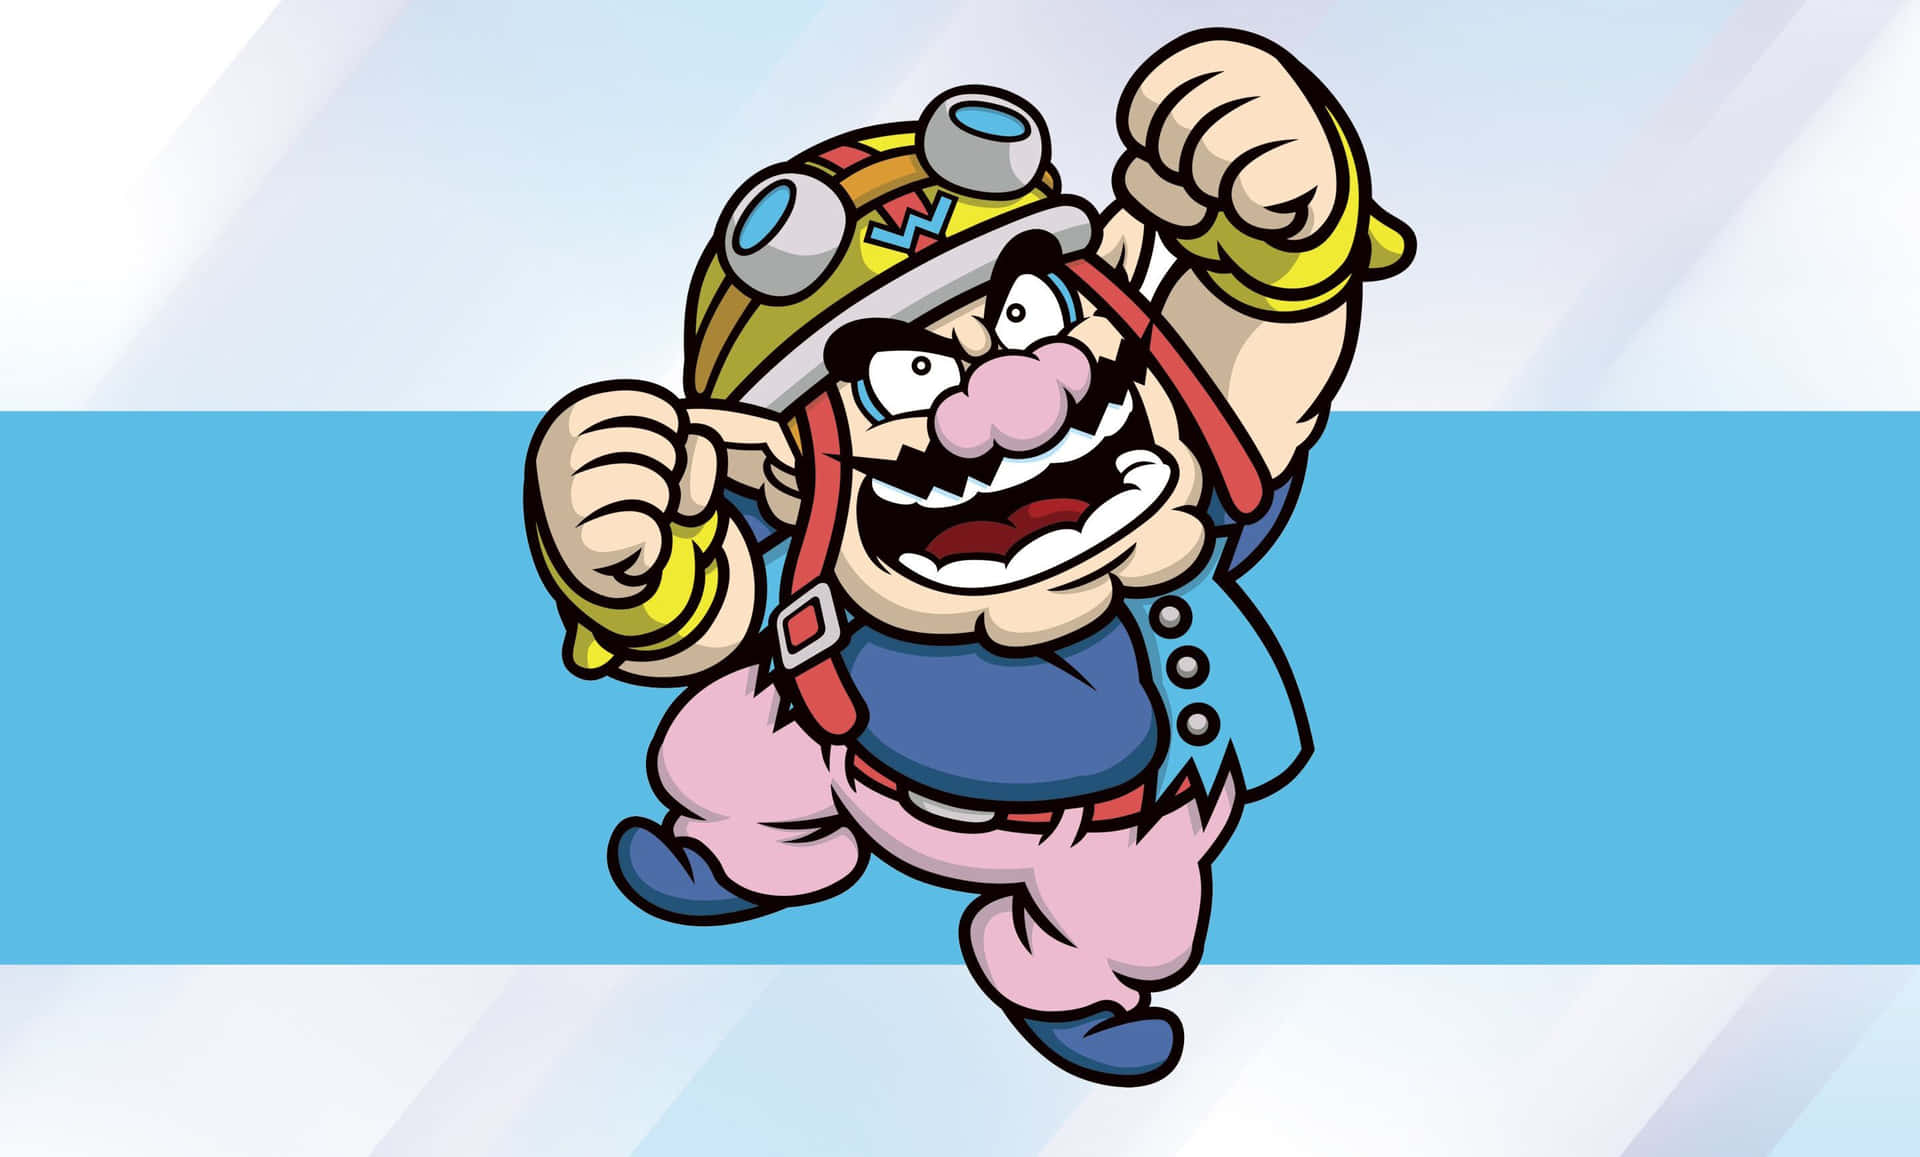 Wario Strikes A Pose In A Vibrant Wallpaper Background